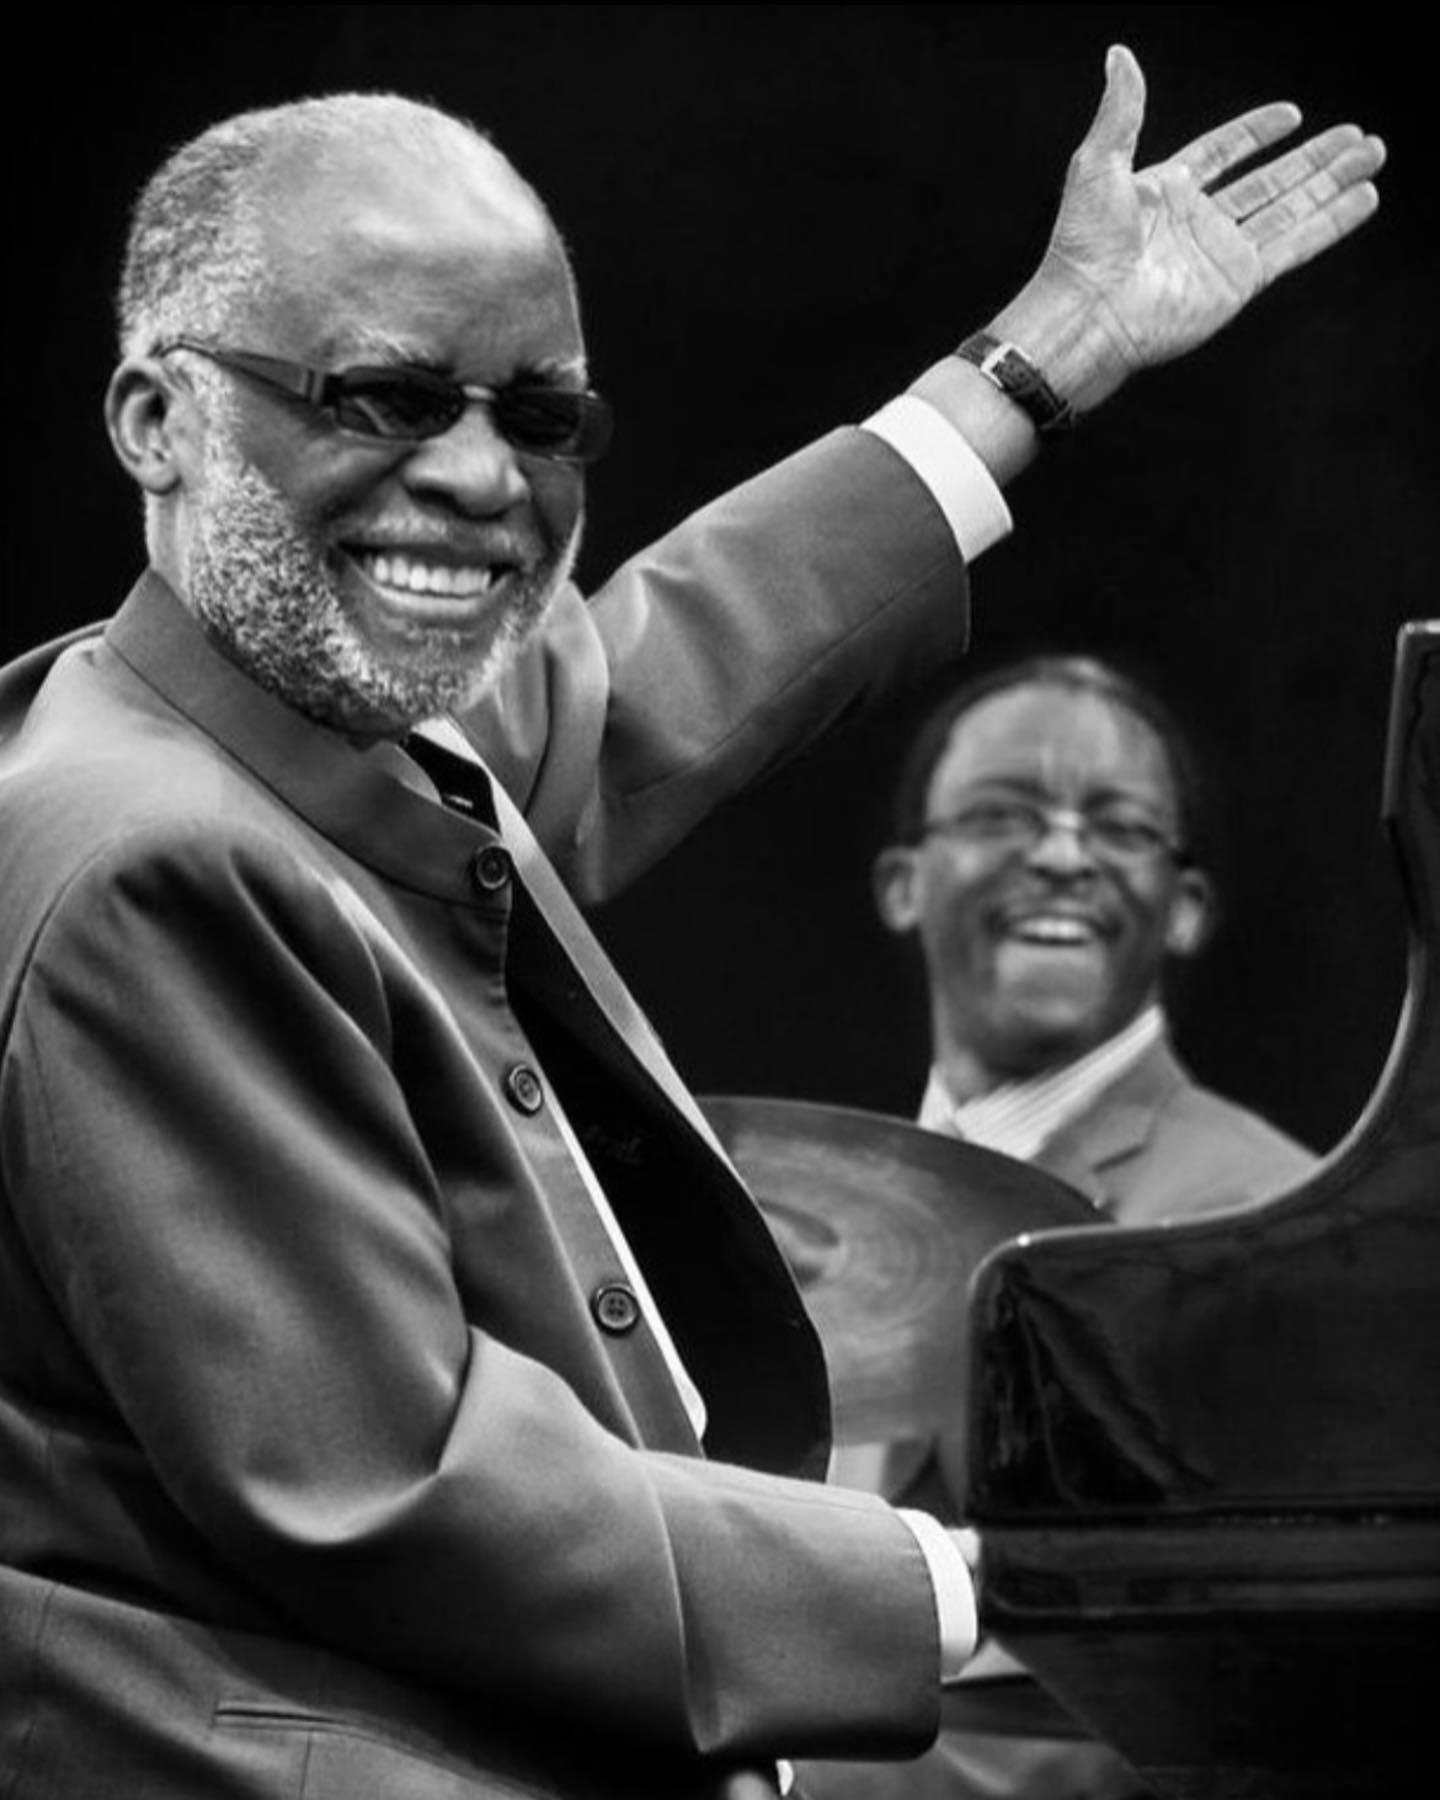 Jazz, Blues And Lounge Music - Legendary American pianist Ahmad Jamal live in Torino Italy at the Ja